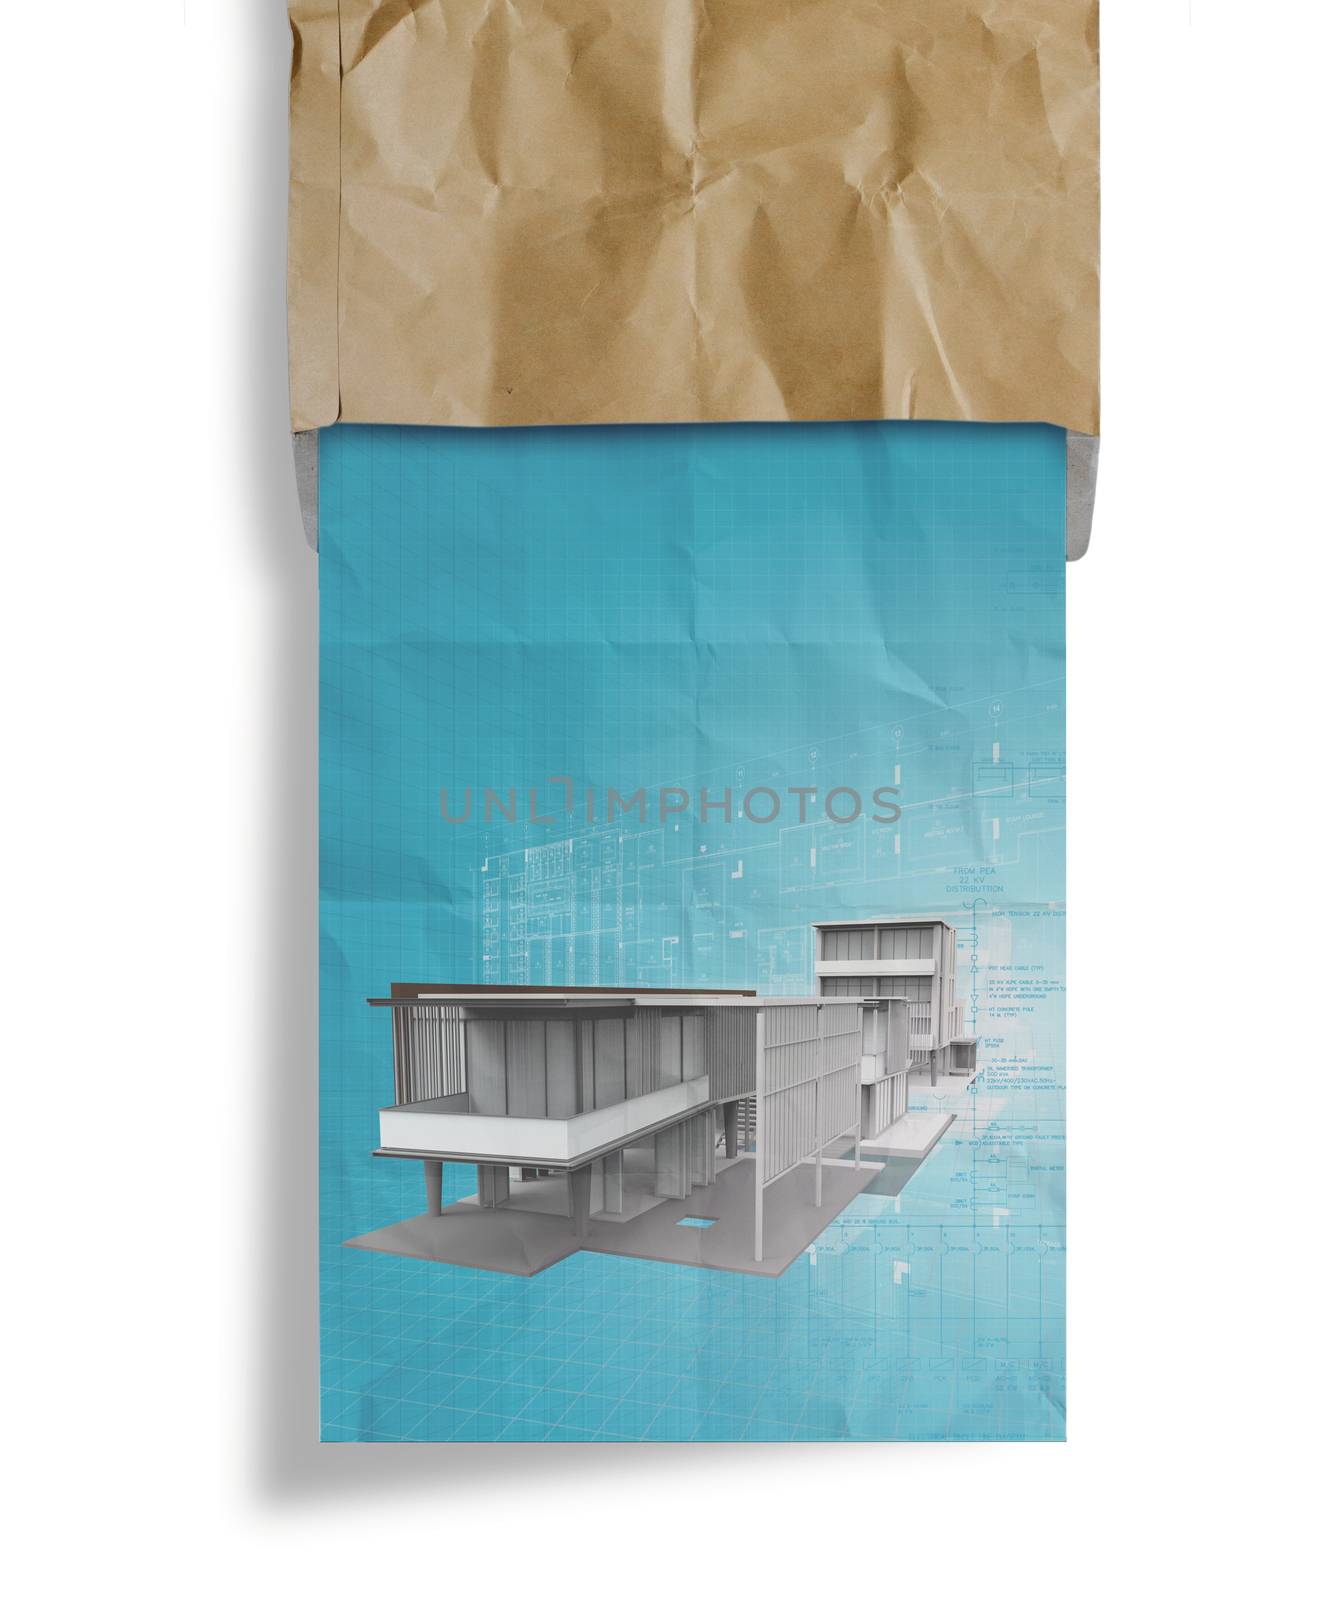 new modern architectural 3d on crumpled paper and recycle envelope background as concept